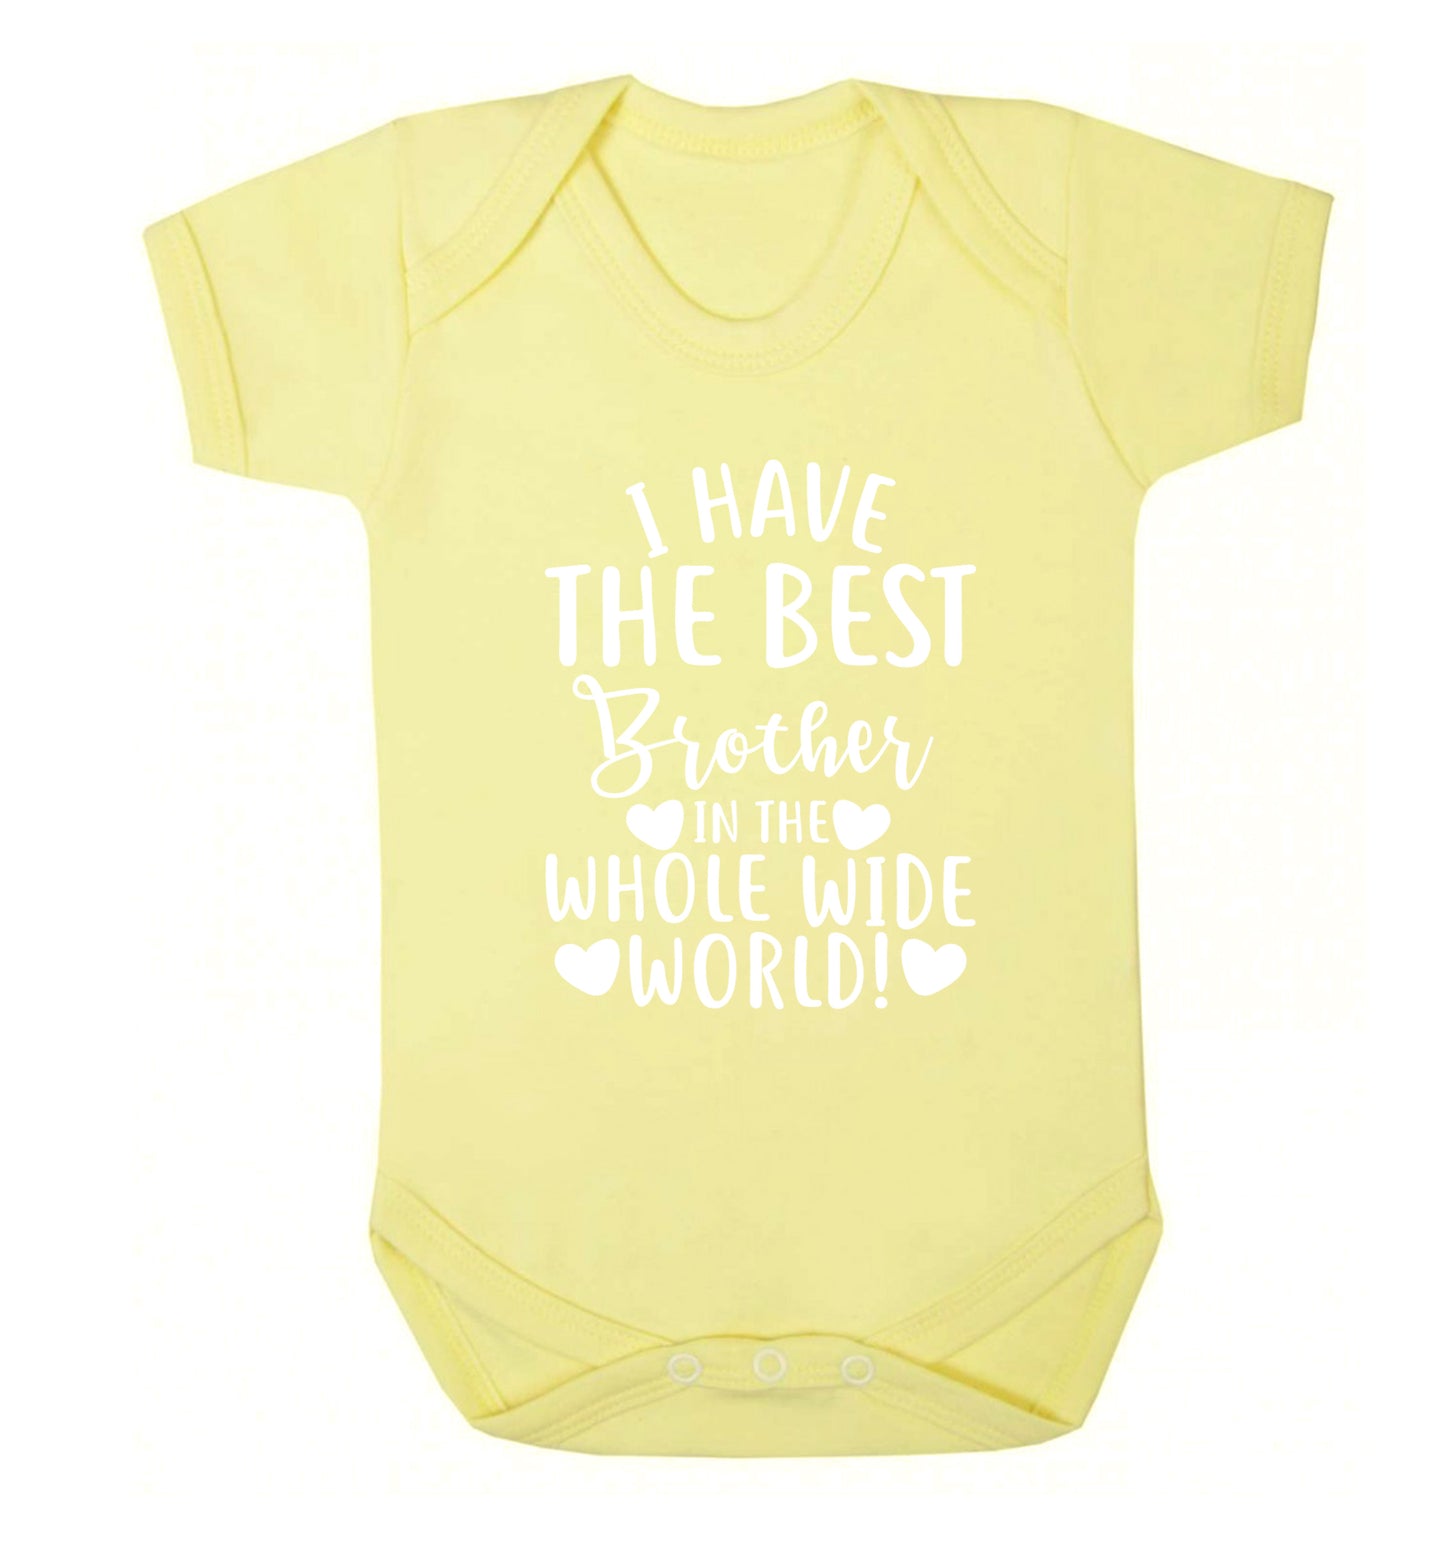 I have the best brother in the whole wide world! Baby Vest pale yellow 18-24 months